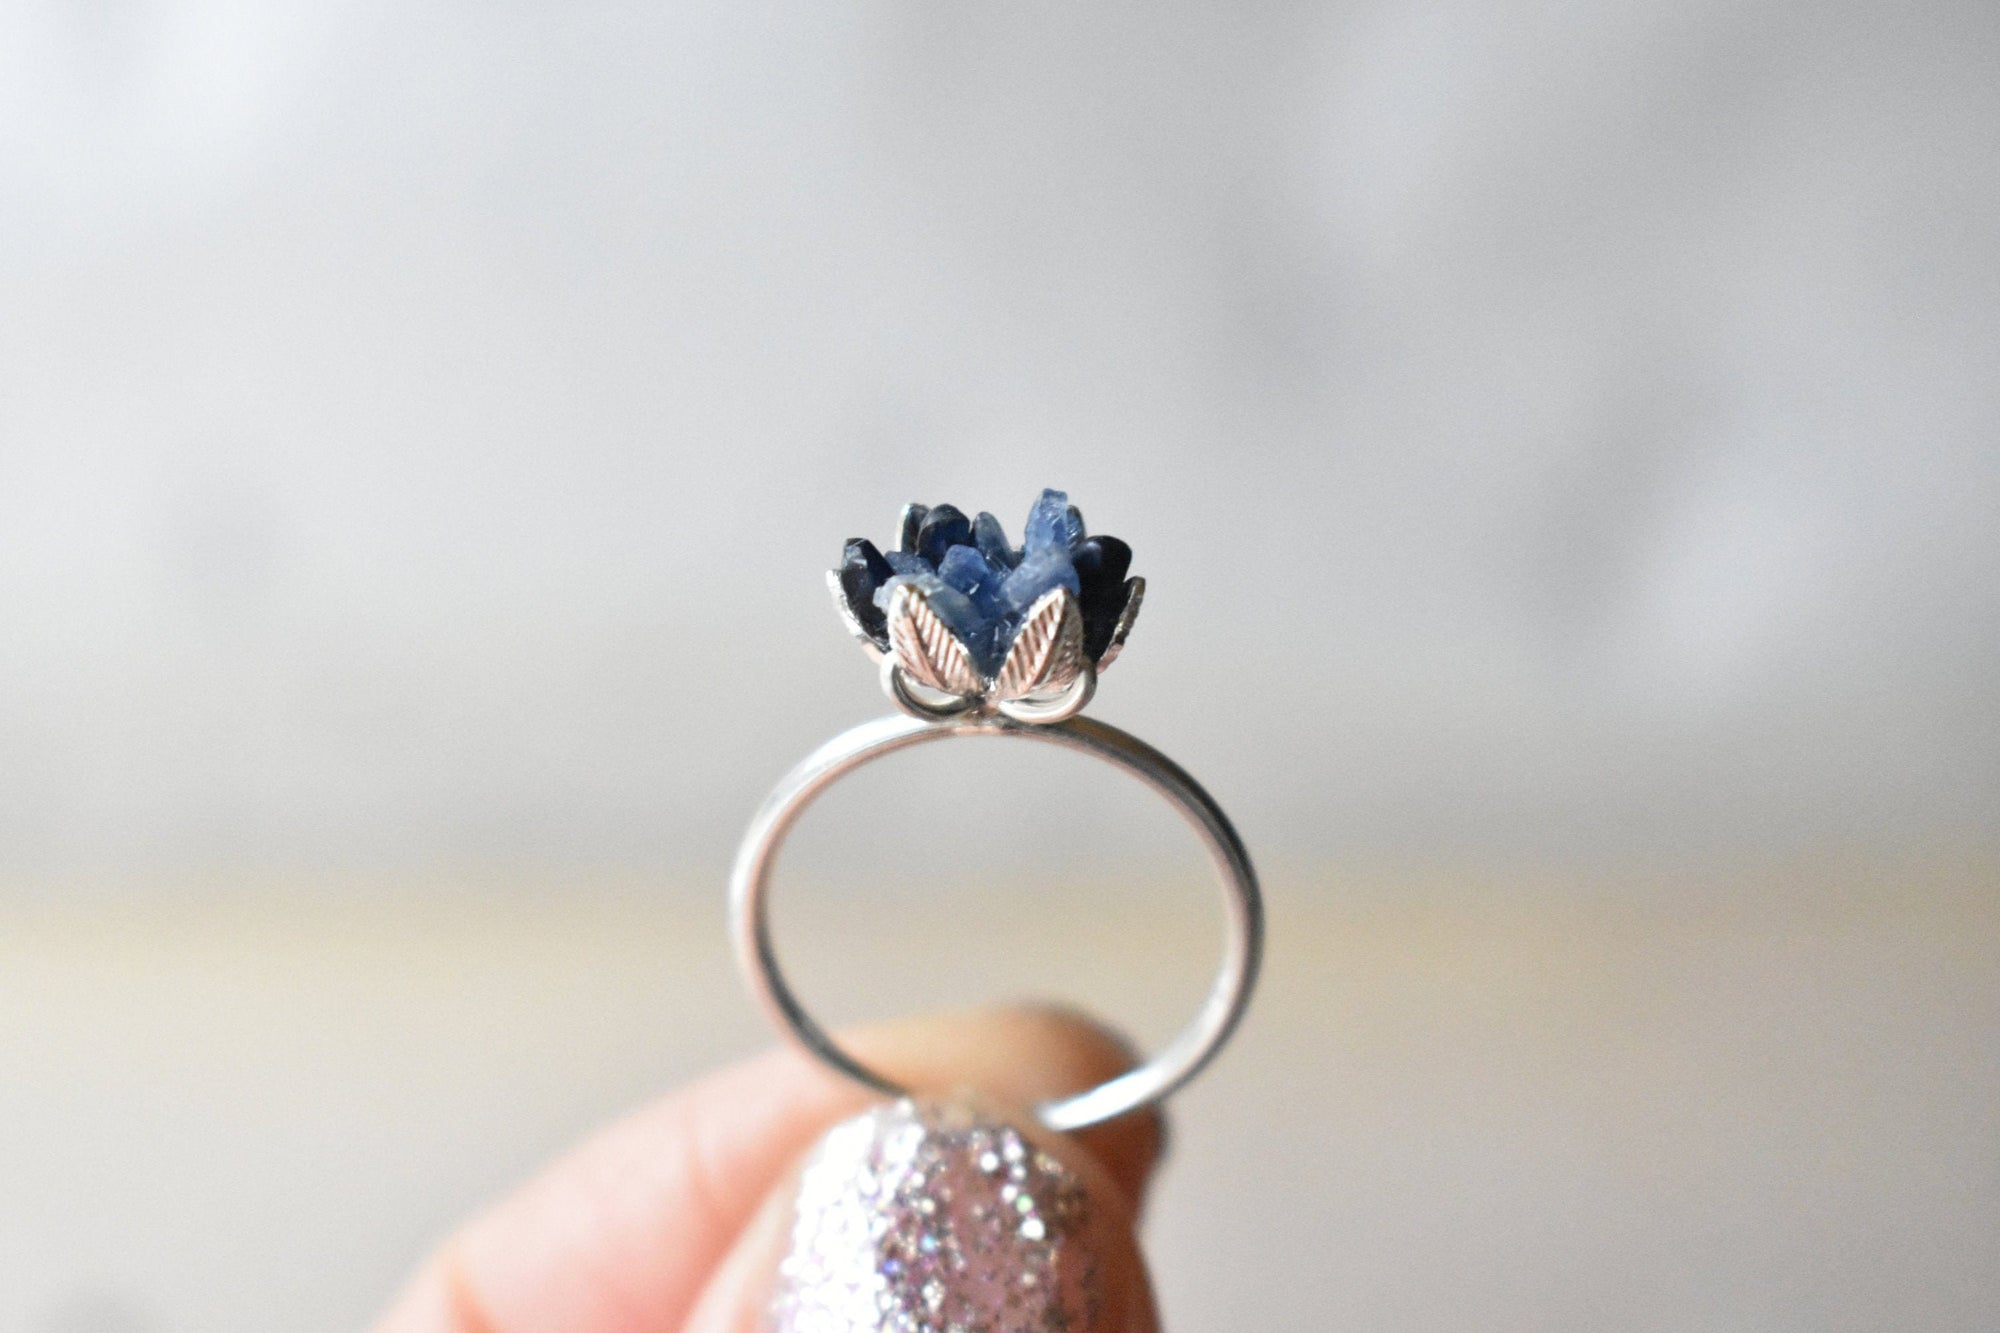 Lotus Ring with Raw Blue Sapphire, Floral Jewelry in Sterling or Gold, A Unique September Birthstone Ring, Sapphire Engagement or Proposal